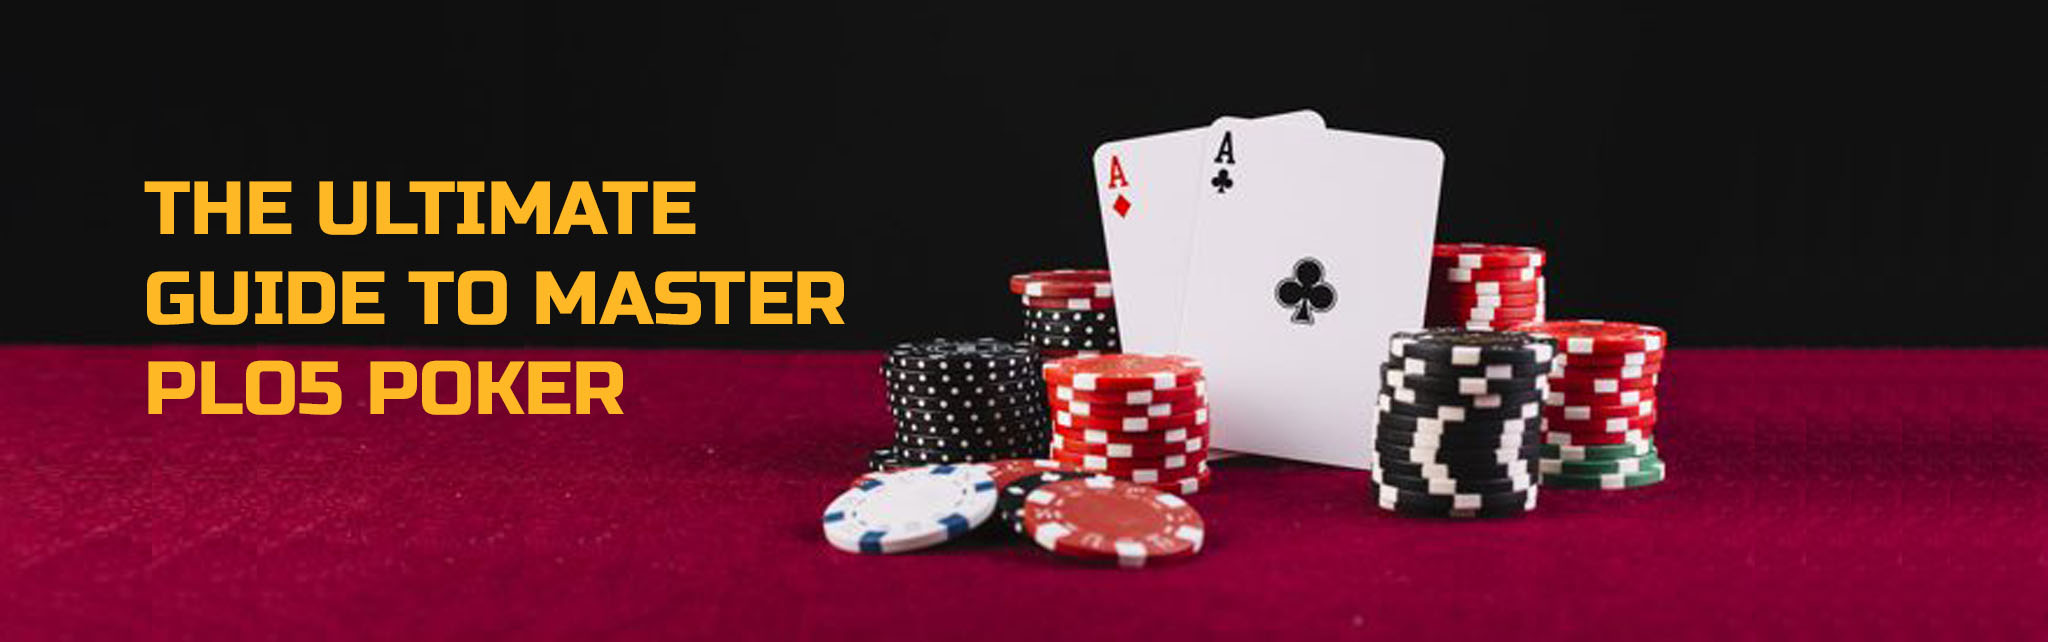 Ultimate Guide to Master Plo5 Poker